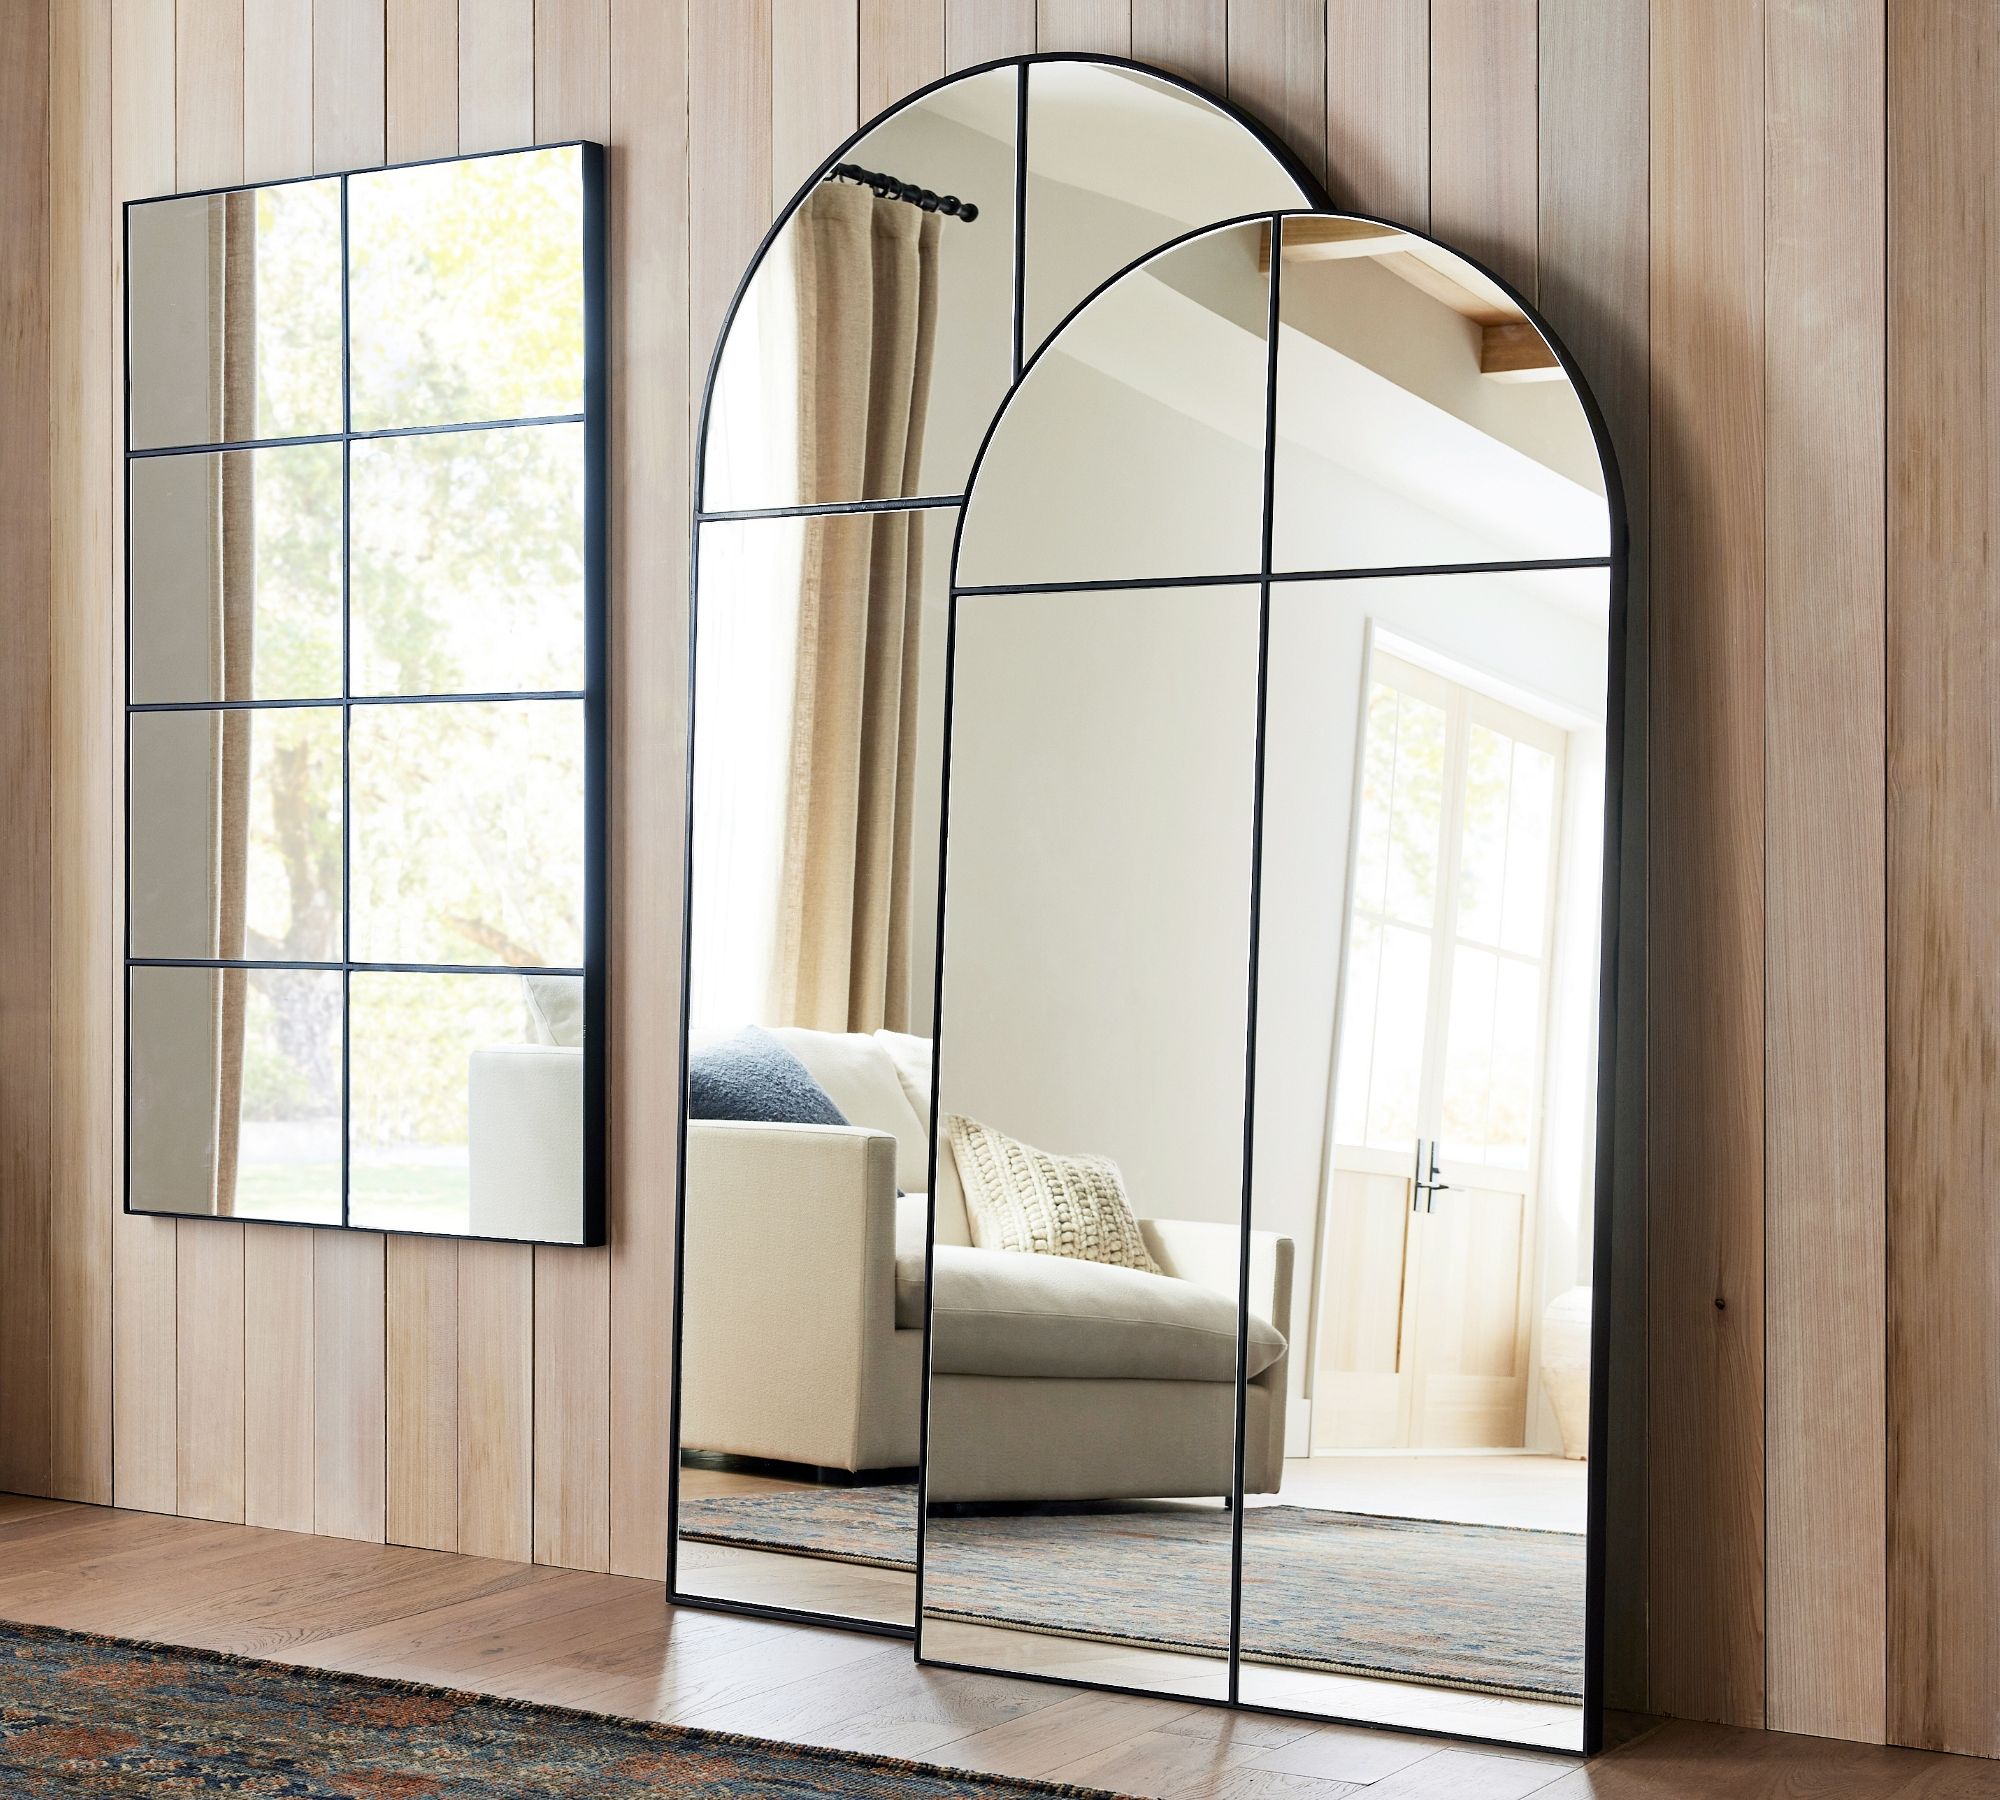 Hayes Paned Mirror Collection